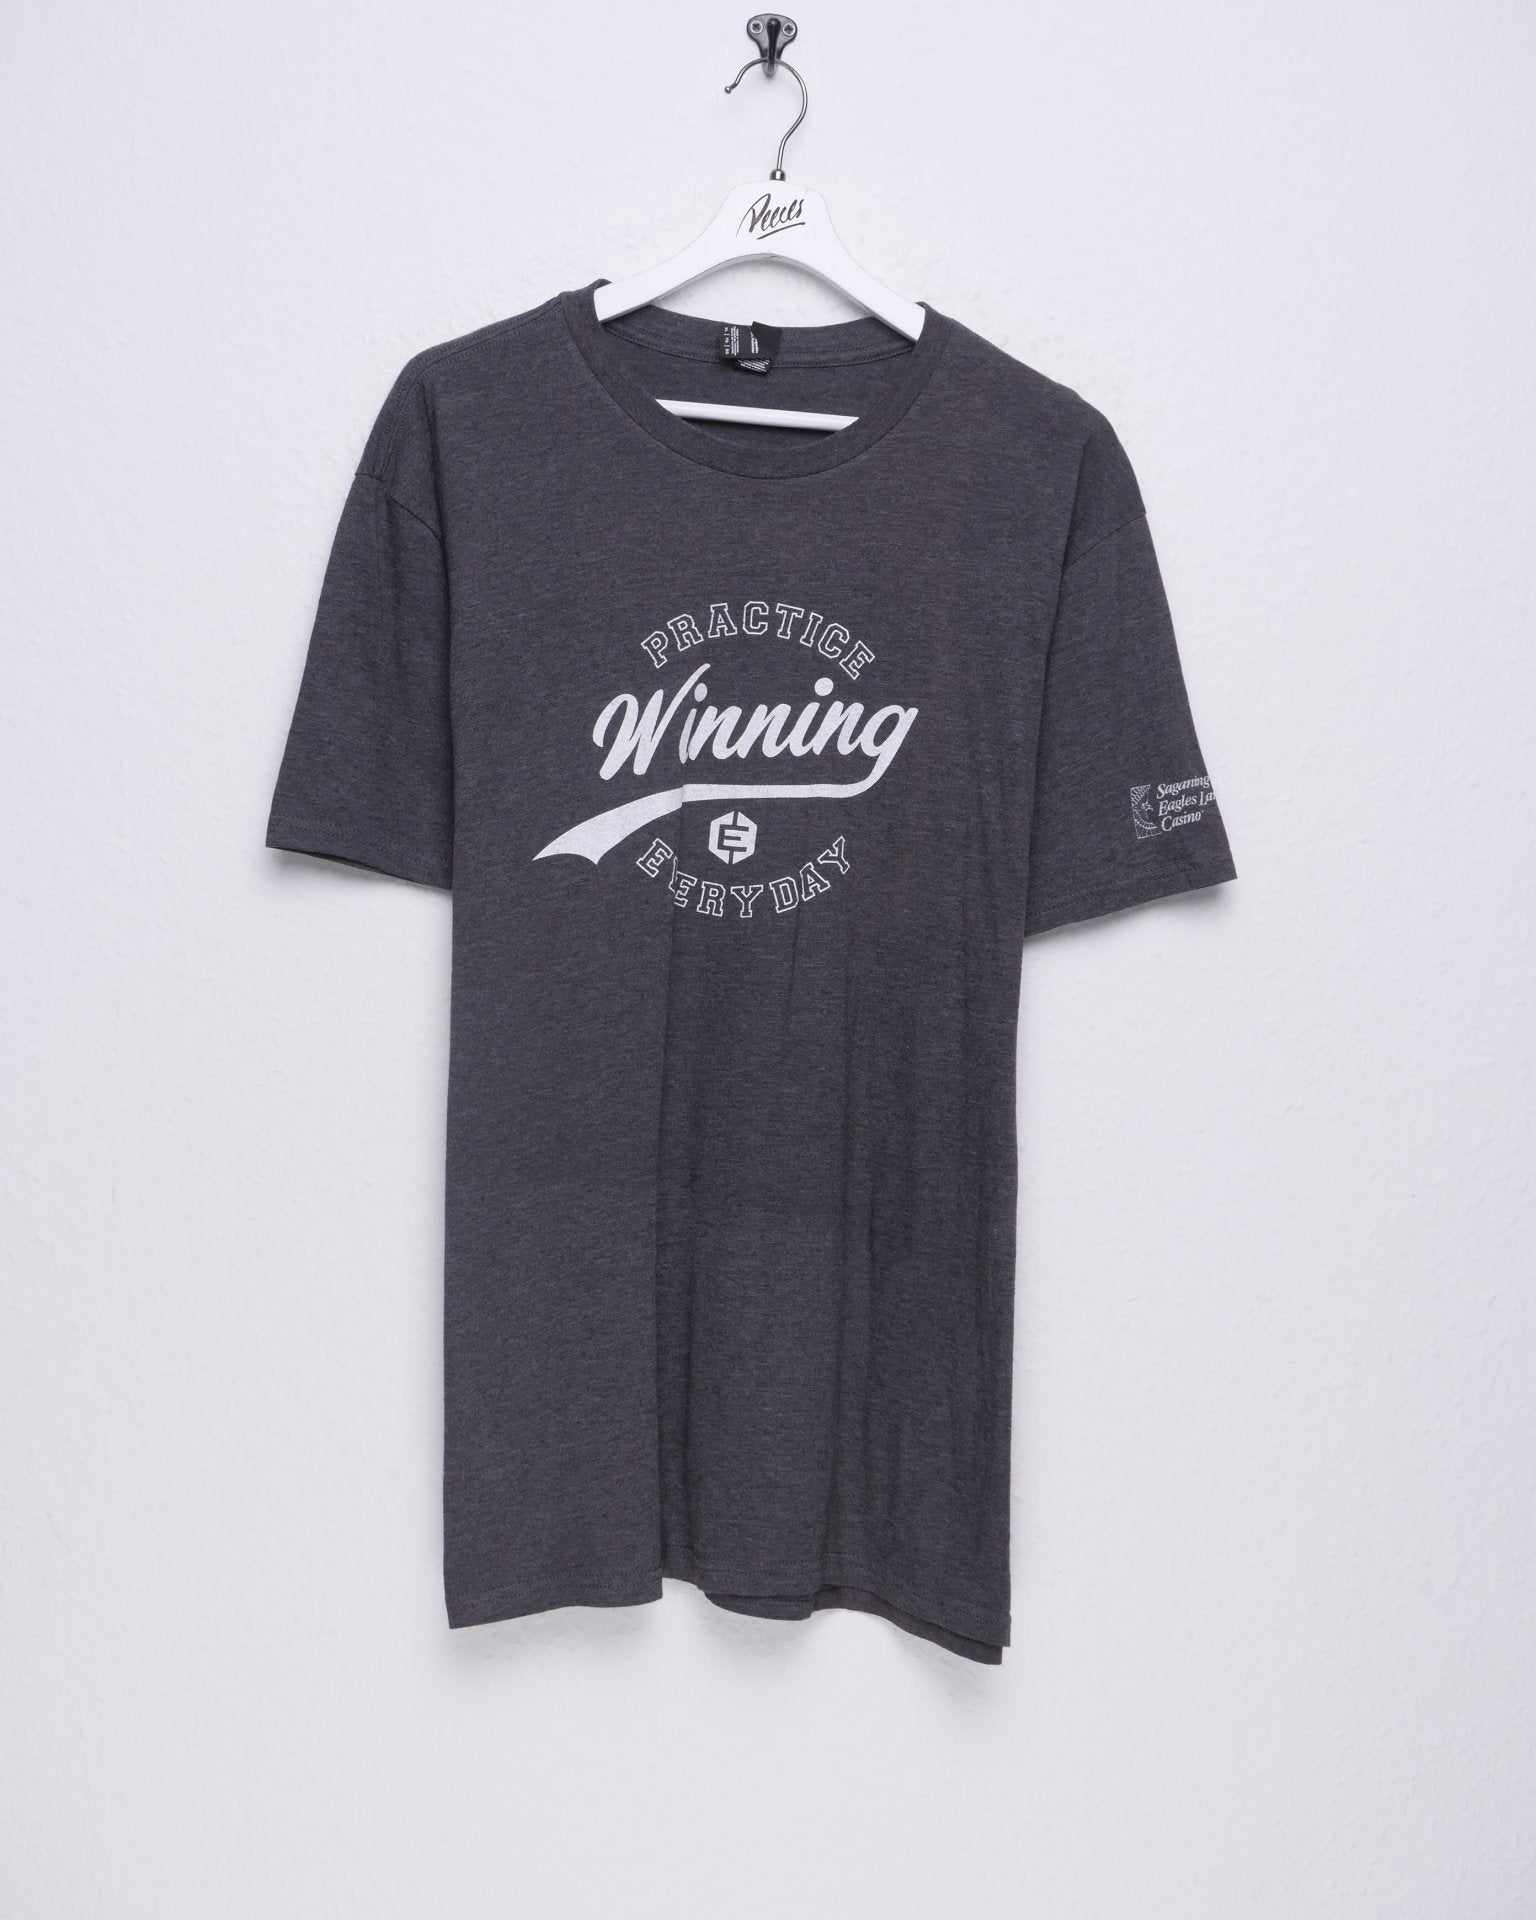 Practice Winning Everyday printed Spellout Shirt - Peeces